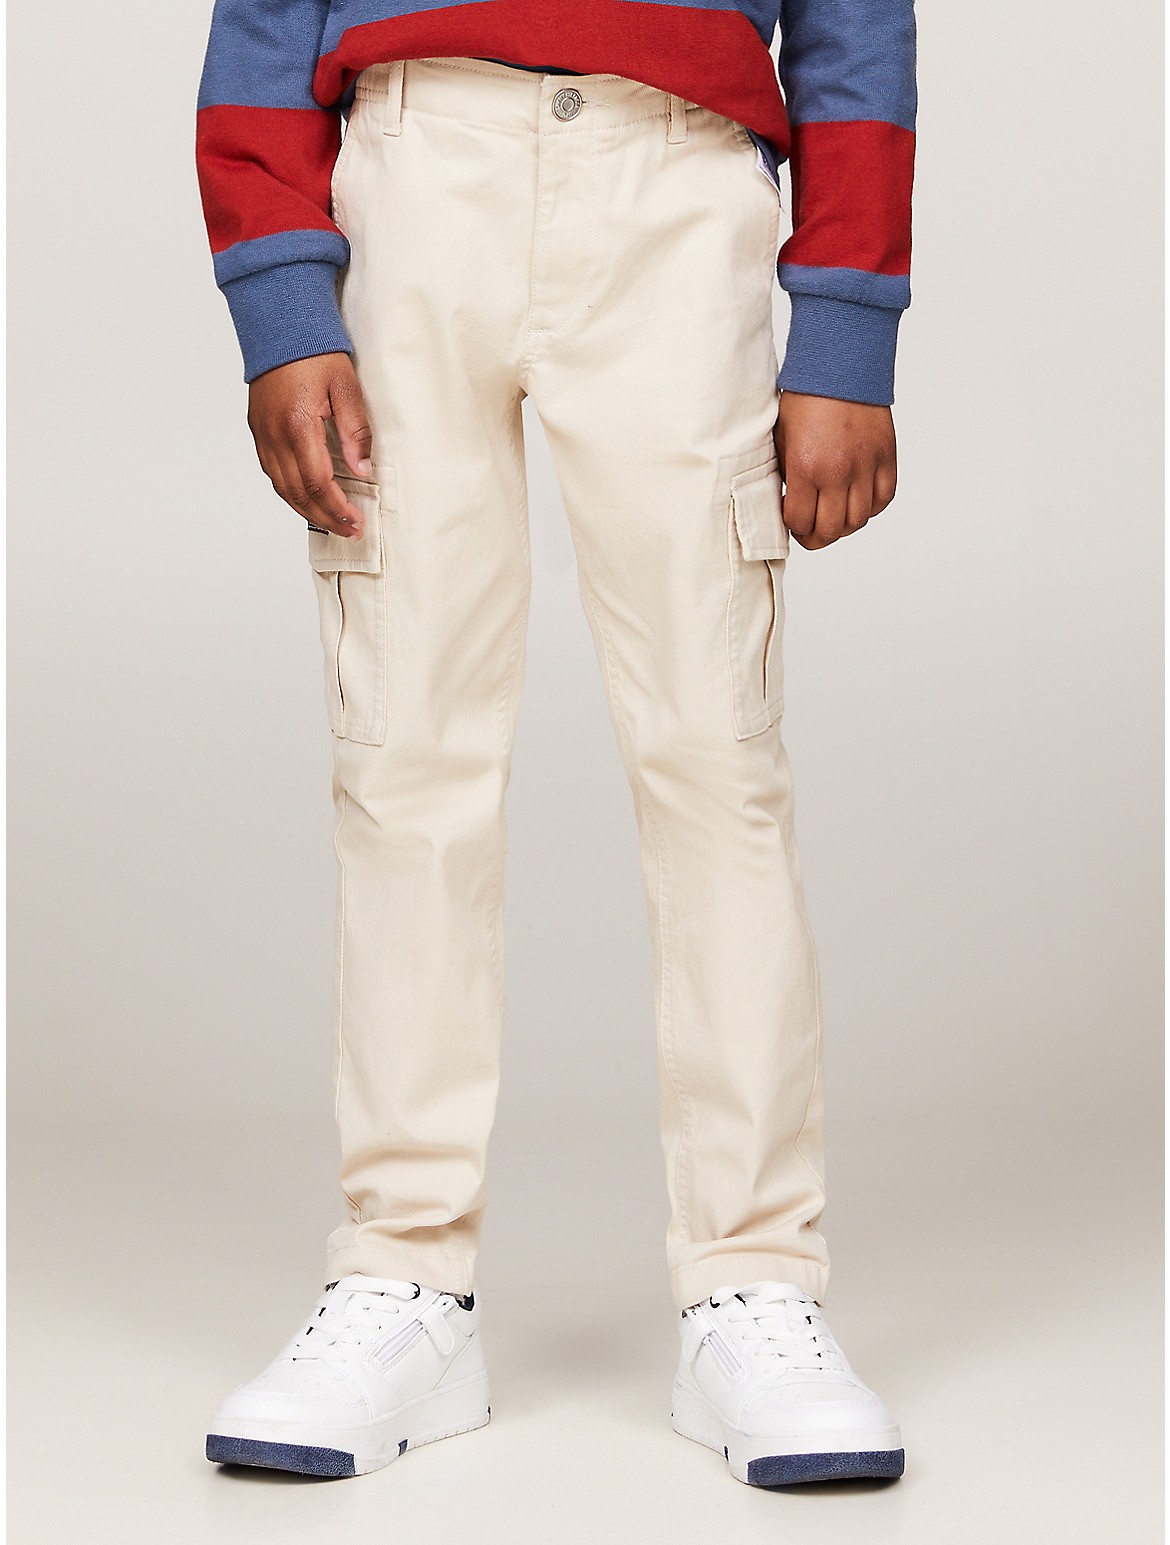 Tommy Hilfiger Boys' Kids' Straight Fit Utility Cargo Pant - Beige - 7